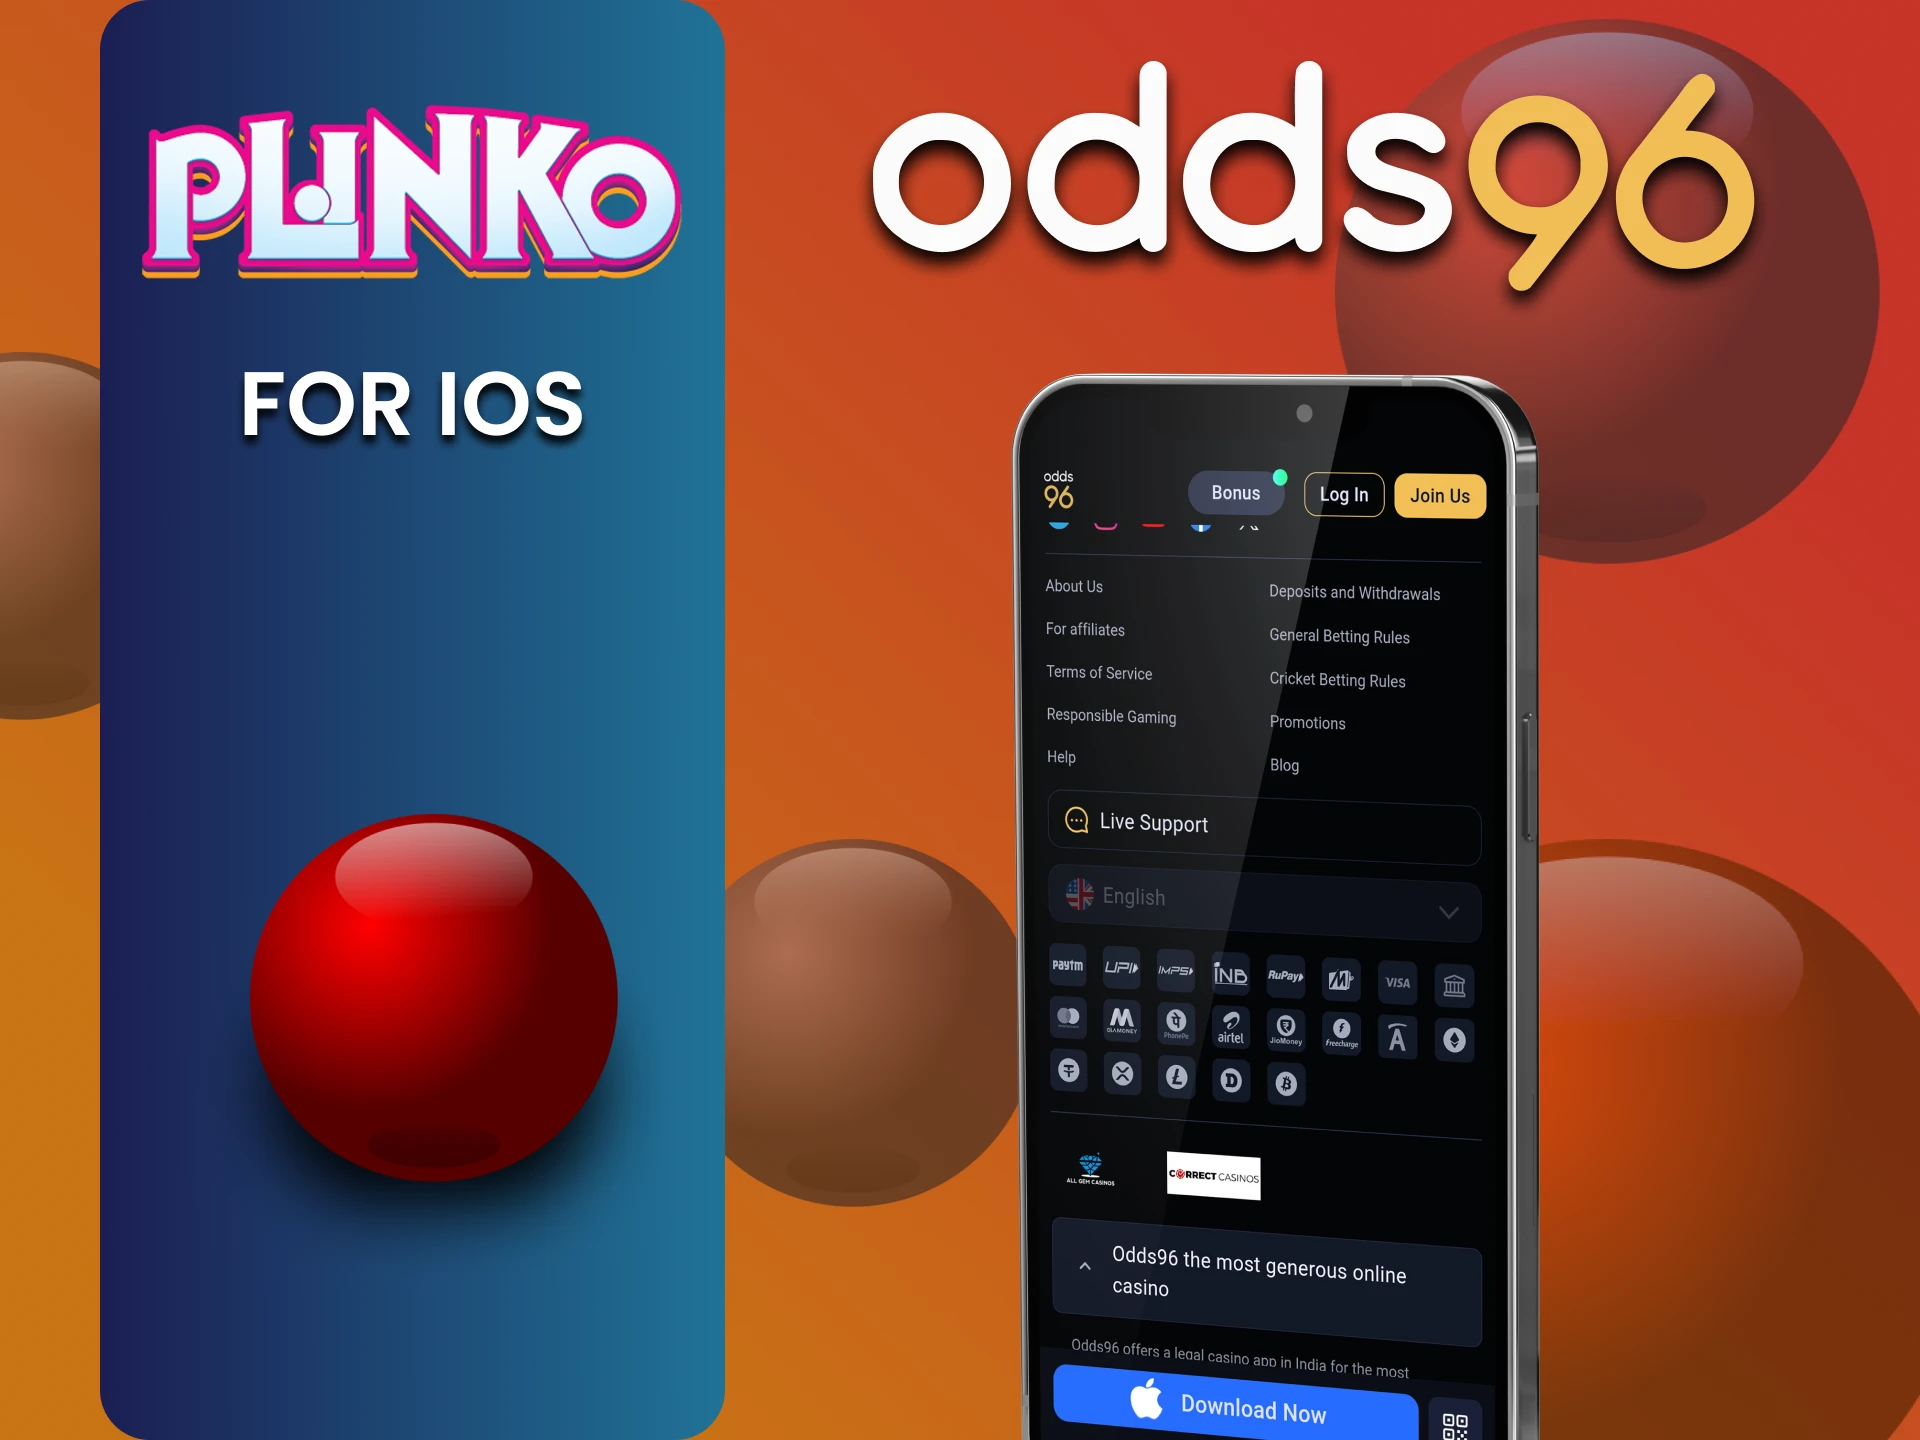 Download the odds96 app for iOS to play Plinko.